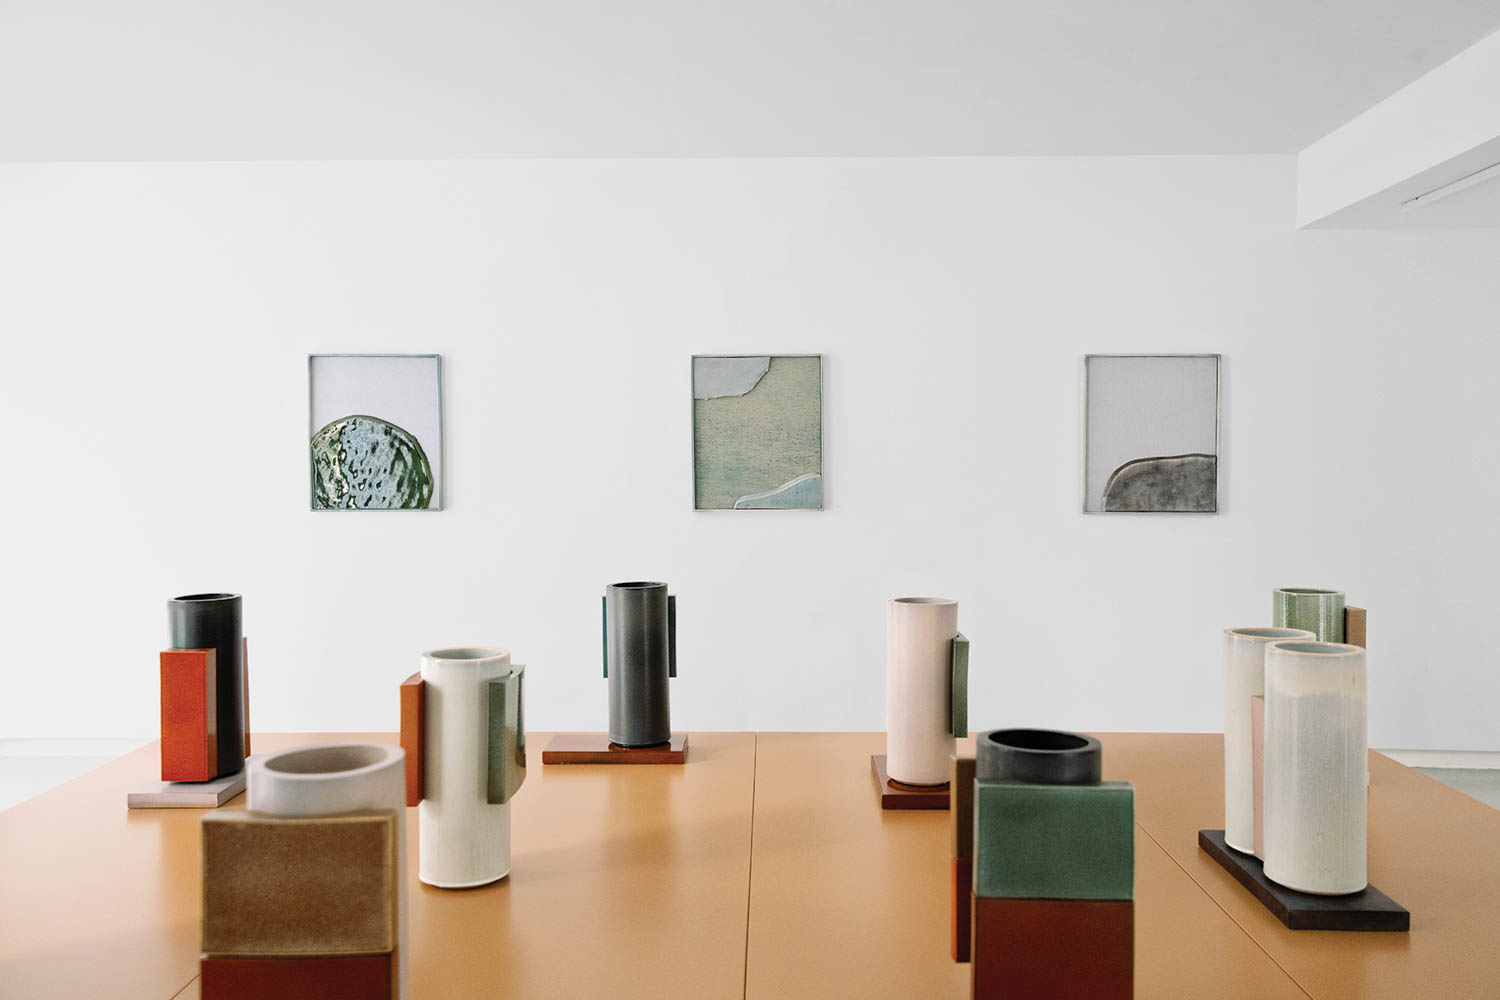 Sosei vases by Ronan Bouroullec from 2022.